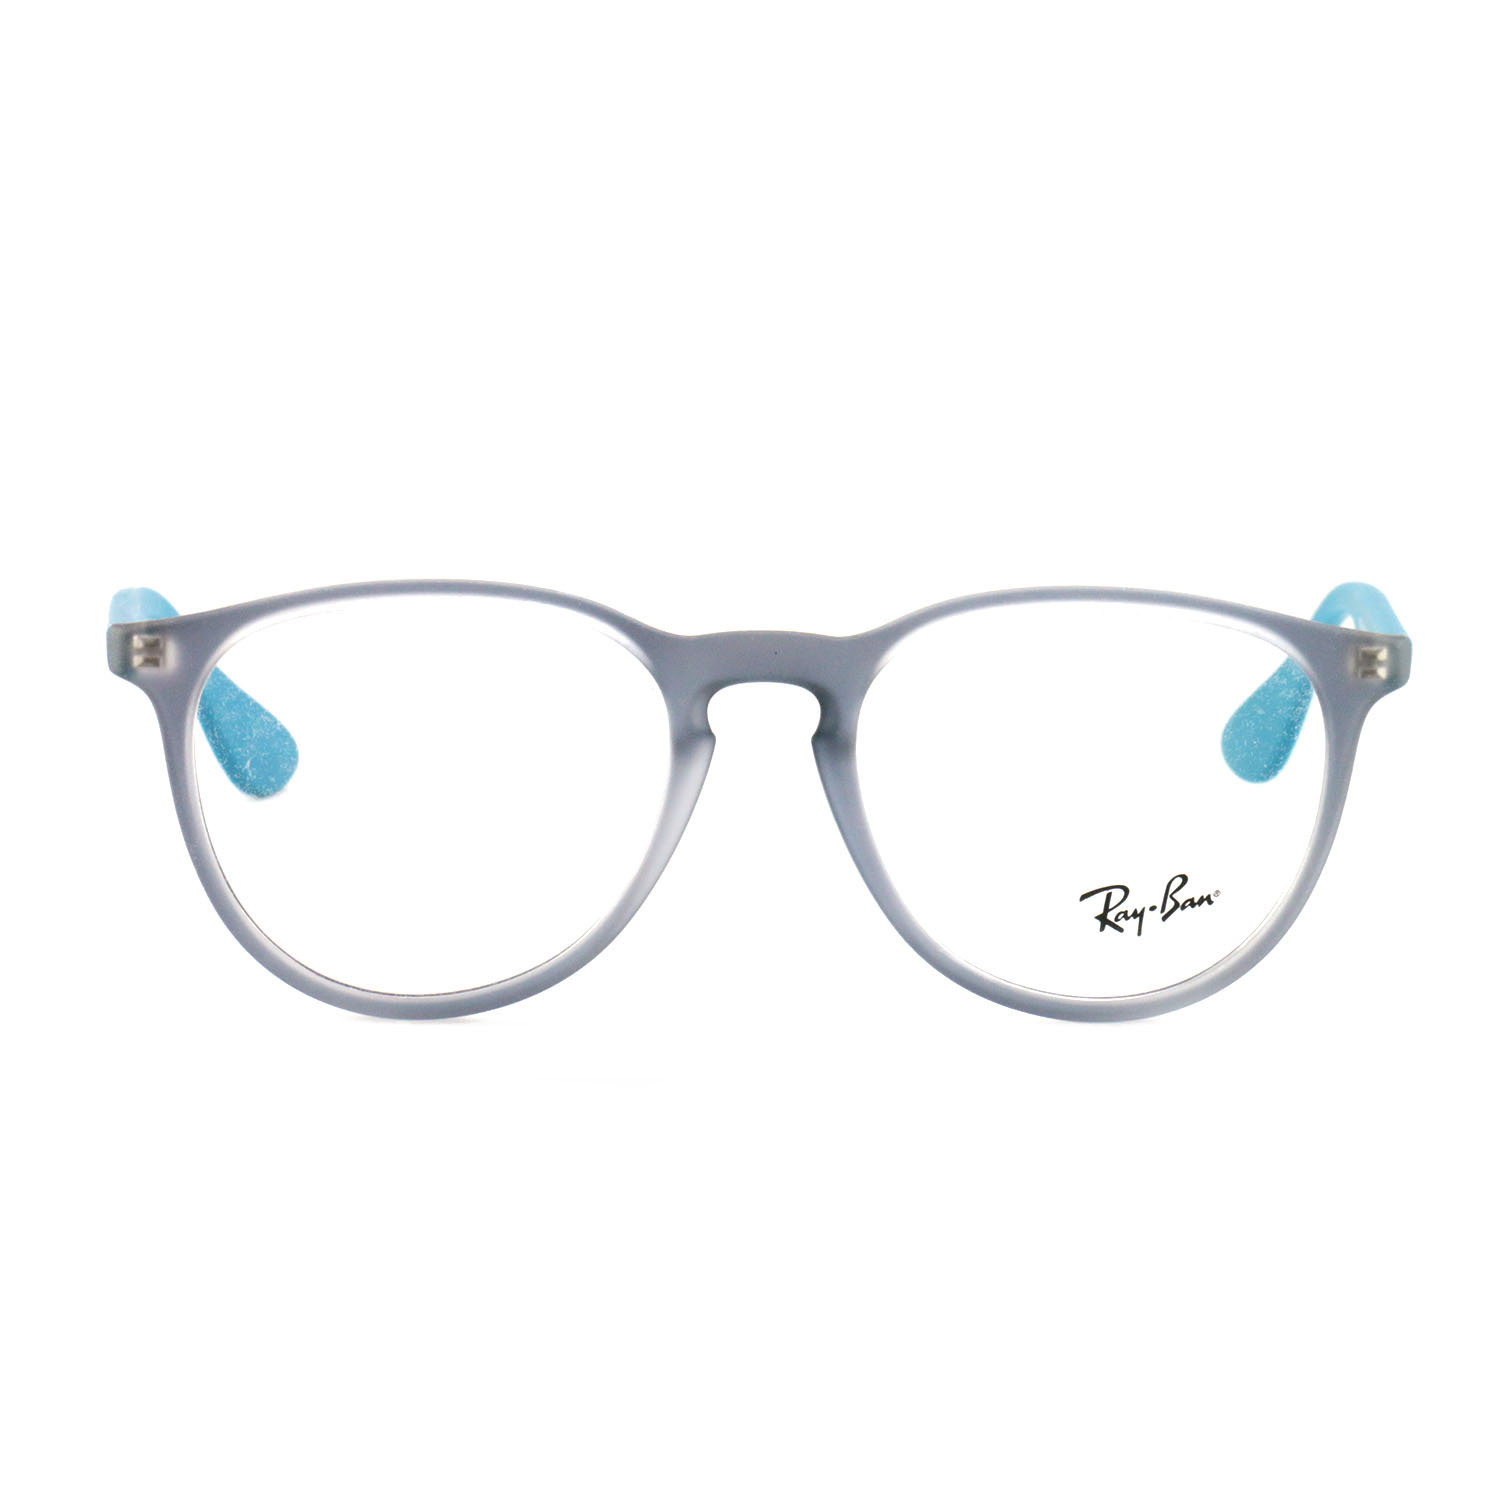 New Ray Ban Eyeglasses Rb 7046 5484 Clear Bluematte Turquoise Acetate 51 18 140 Eyeglass Frames